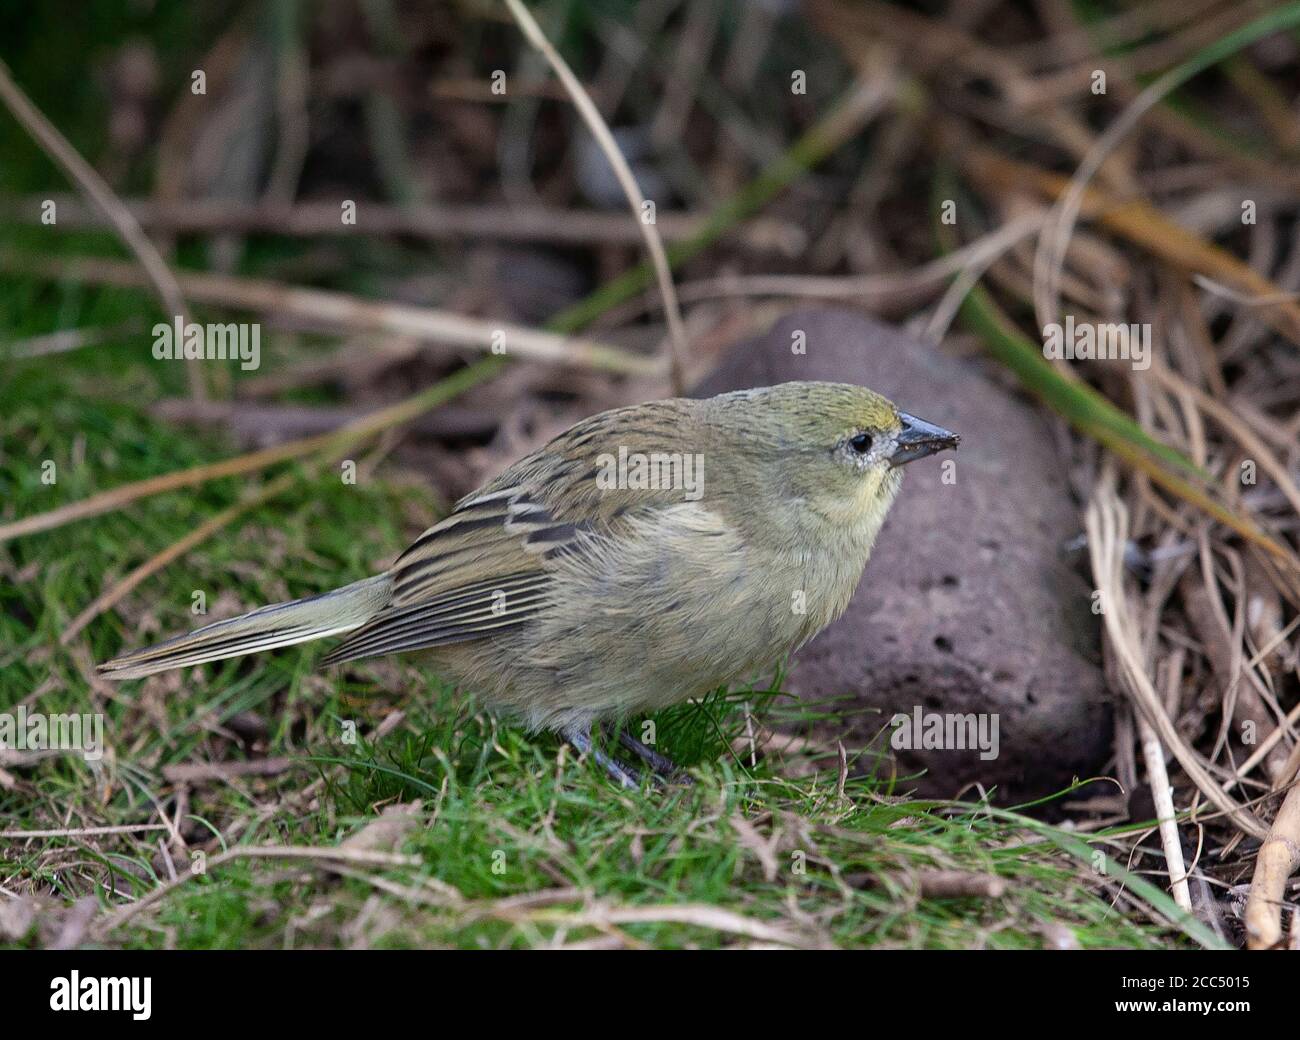 Inaccessible Island finch, Inaccessible bunting (Nesospiza acunhae), an endemic songbird to Inaccessible Island in the Tristan da Cunha archipelago, Stock Photo